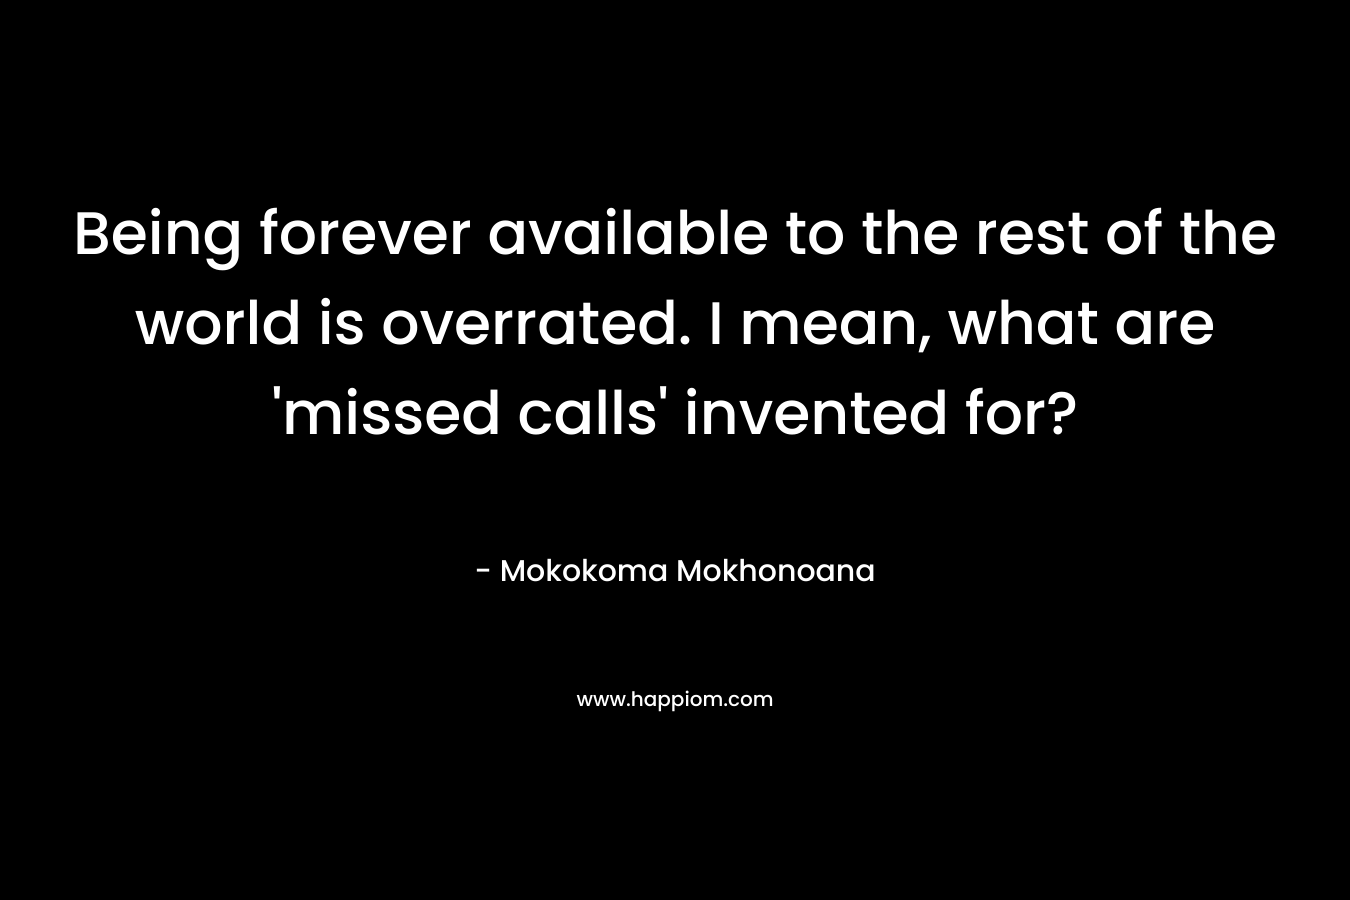 Being forever available to the rest of the world is overrated. I mean, what are ‘missed calls’ invented for? – Mokokoma Mokhonoana